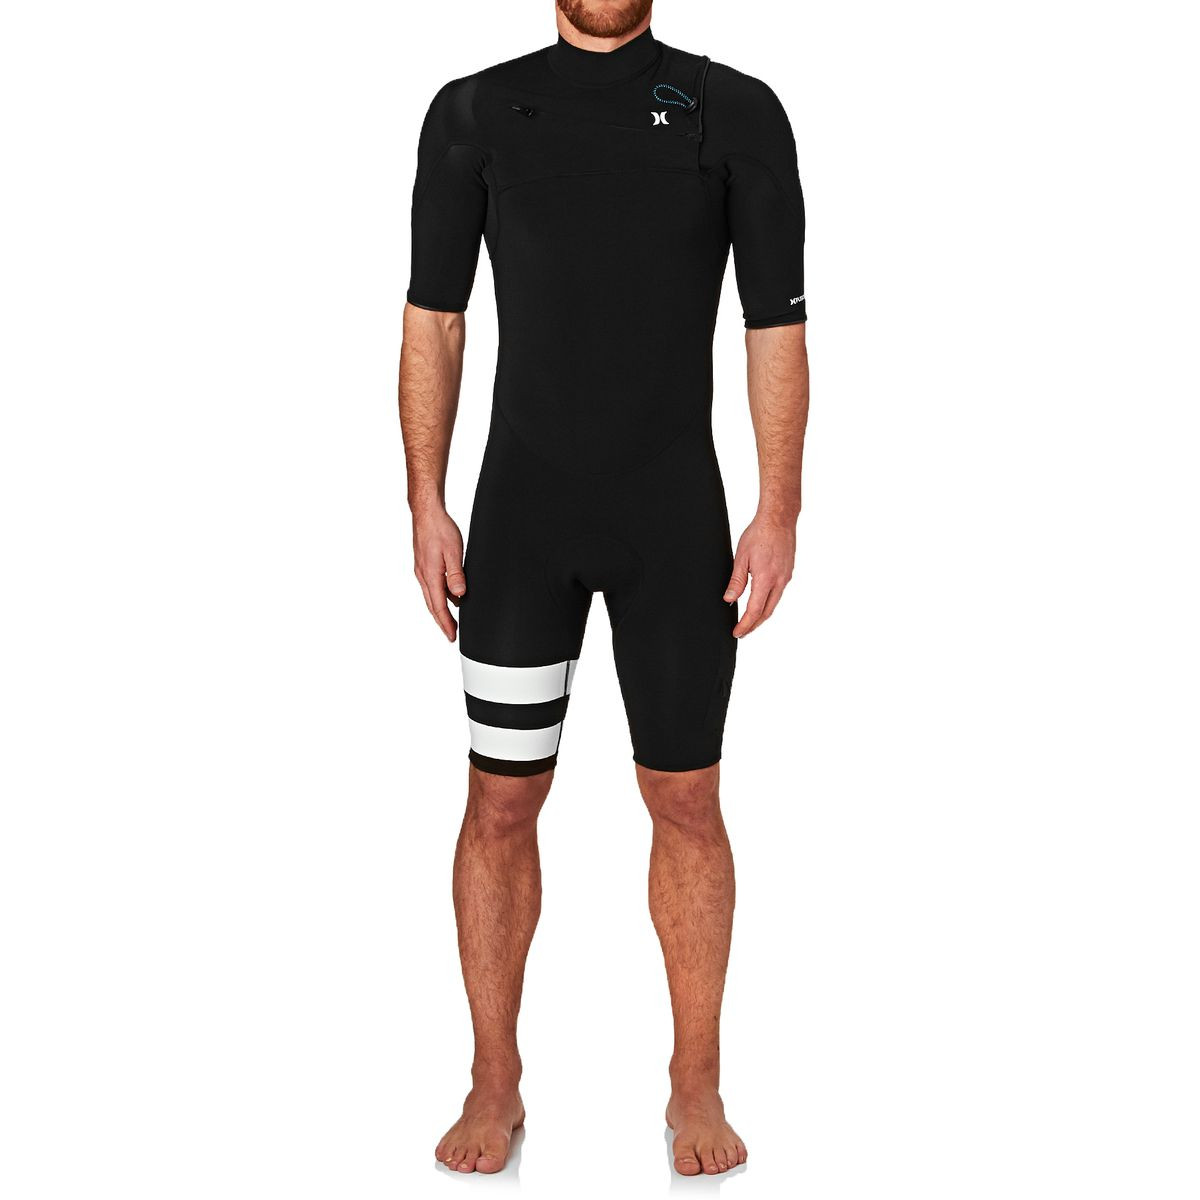 Hurley Fusion 2mm 2017 Chest Zip Short Sleeve Shorty Wetsuit - Black